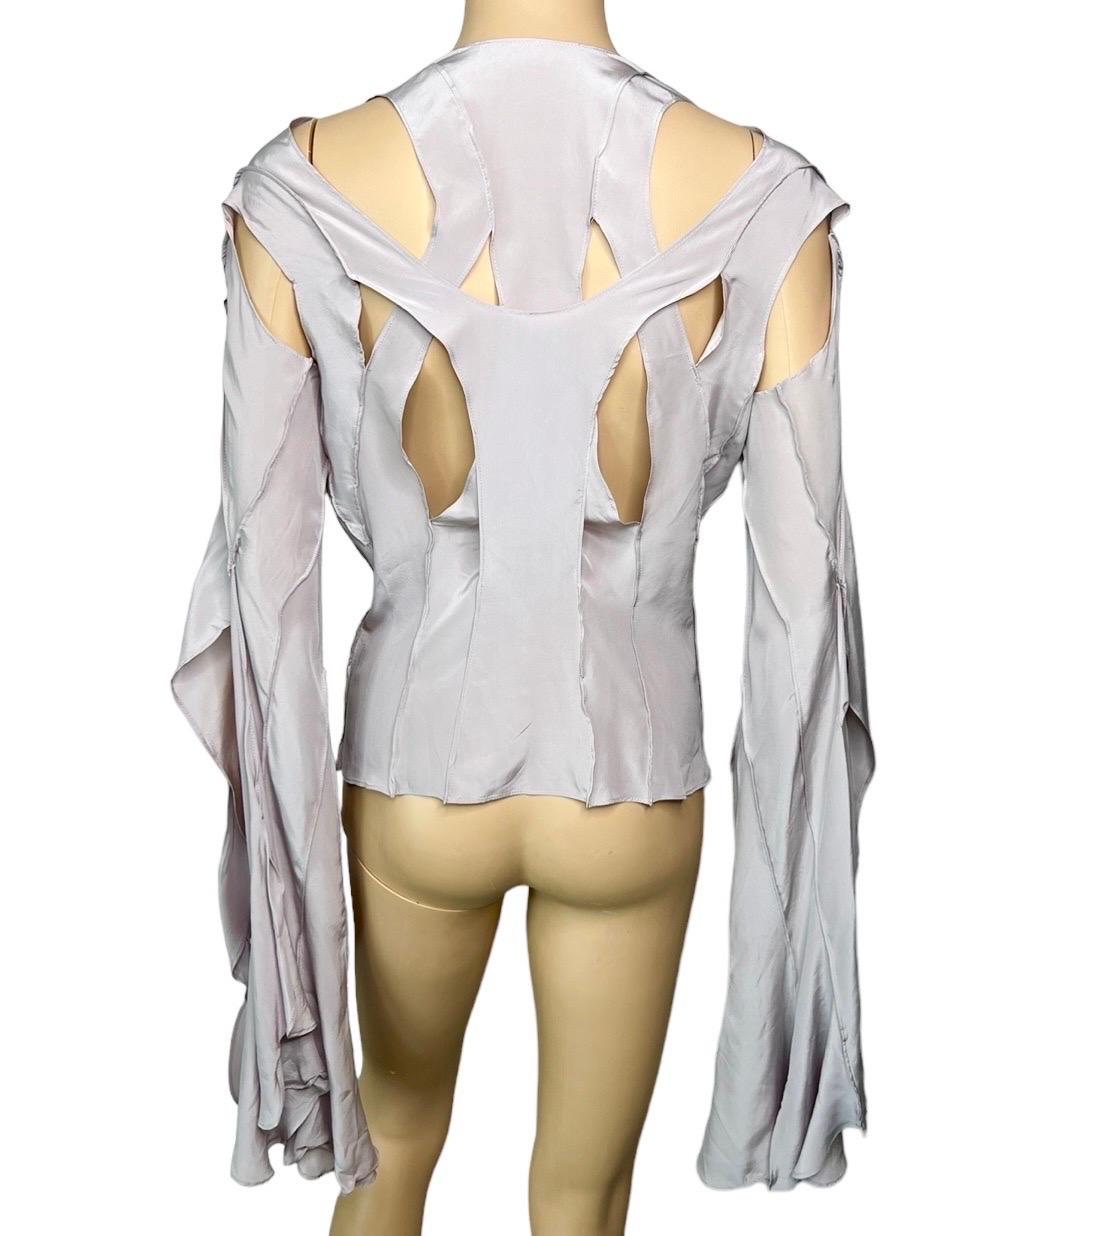 Tom Ford for Yves Saint Laurent YSL S/S 2003 Runway Cutout Shirt Blouse Top For Sale 4